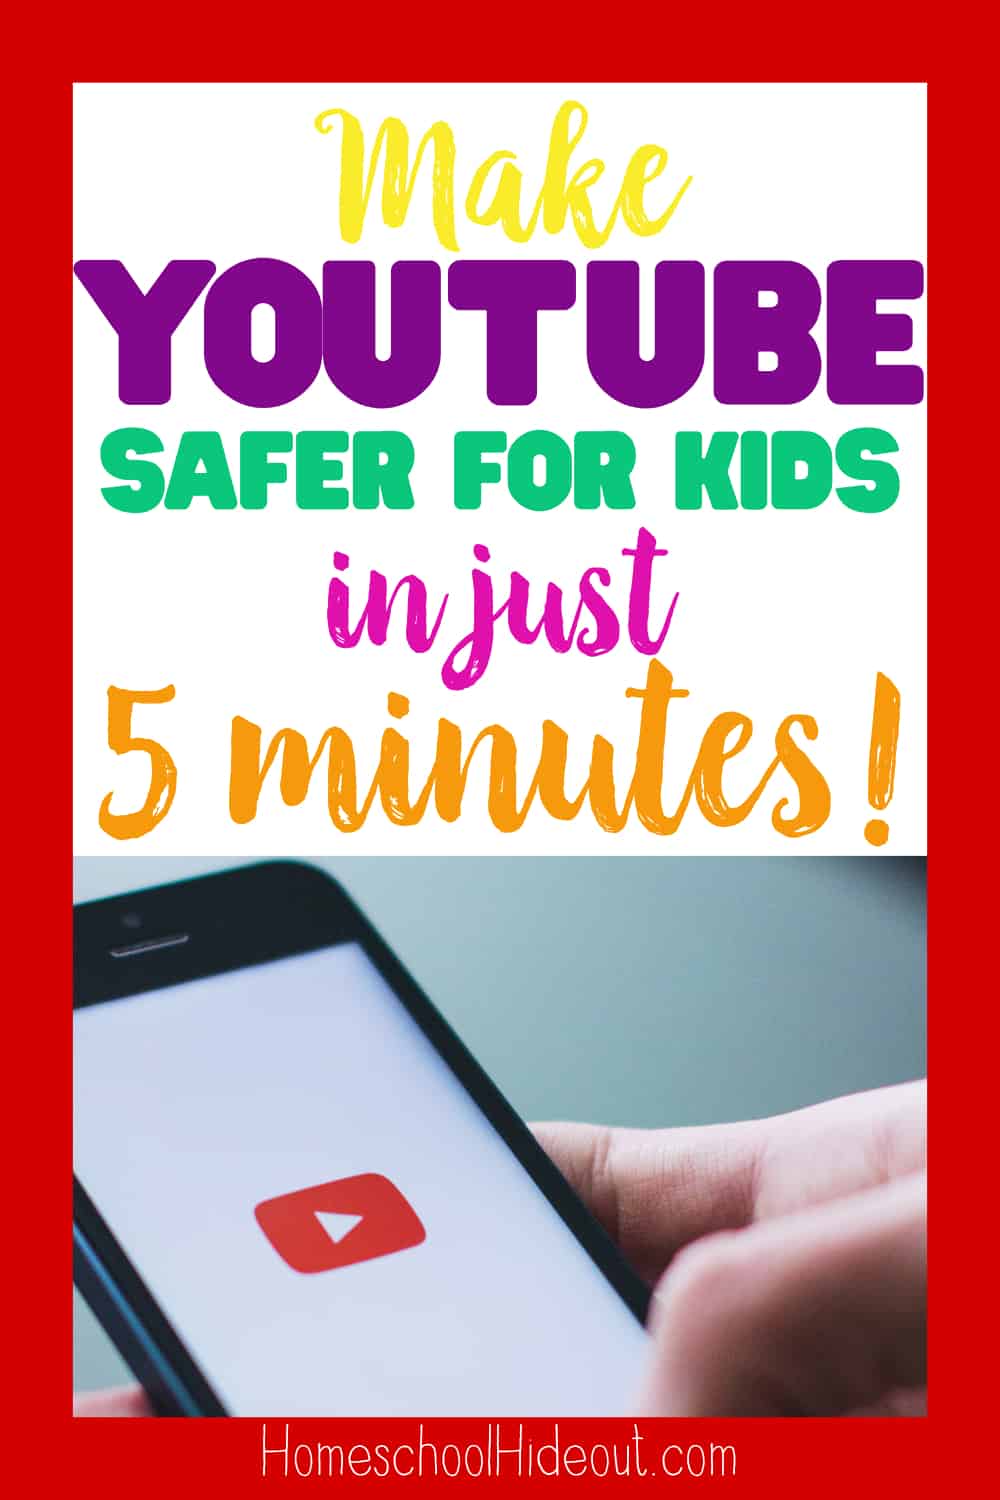 It's easy to make YouTube safe for kids these days! Simply install Safe Vision, a free app that monitors your kiddos YouTube use. #youtube #homeschool #safevisionapp